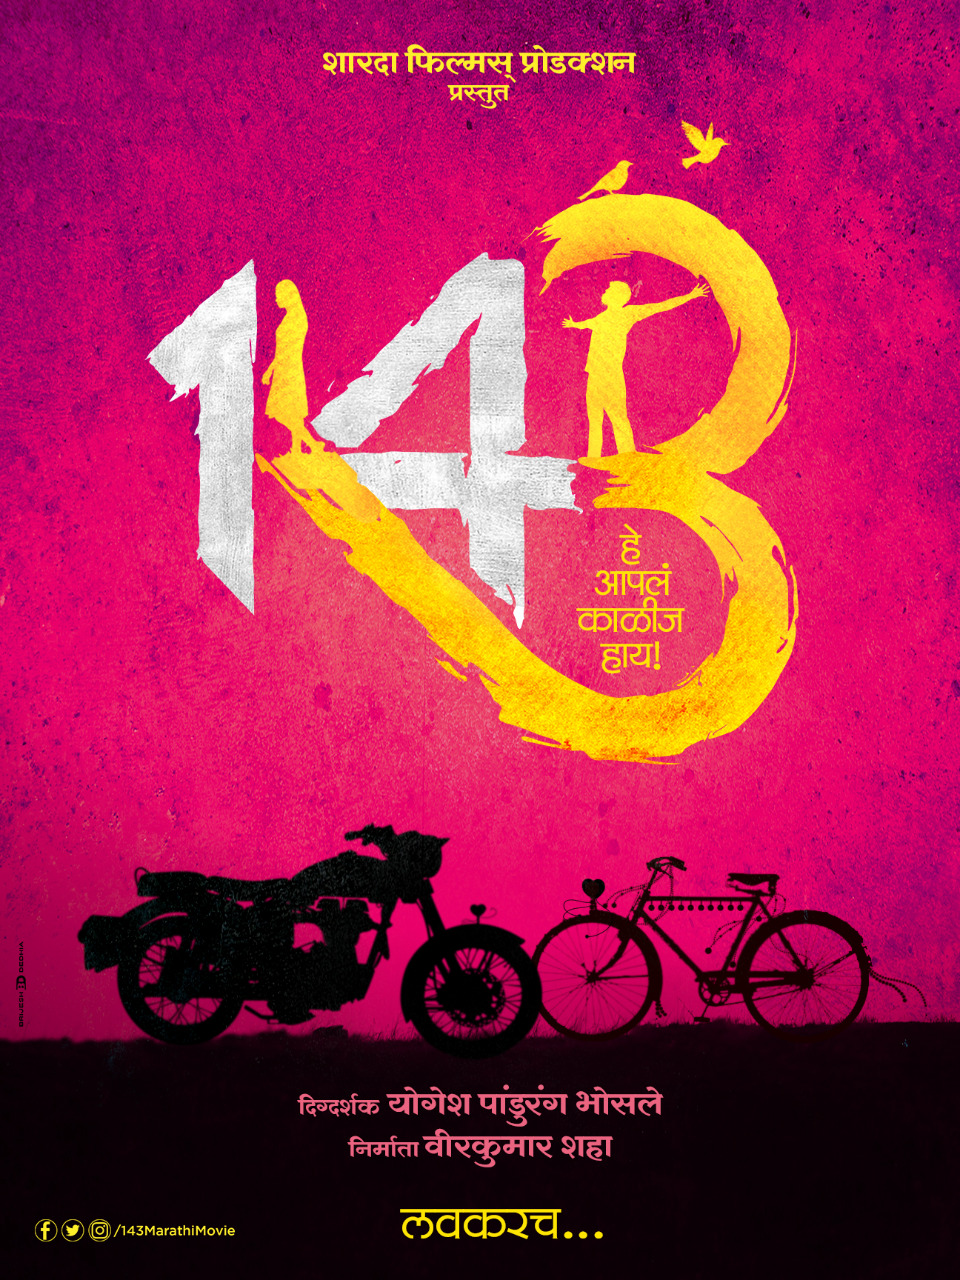 Shooting of Marathi films in a southern manner; 143's poster displayed